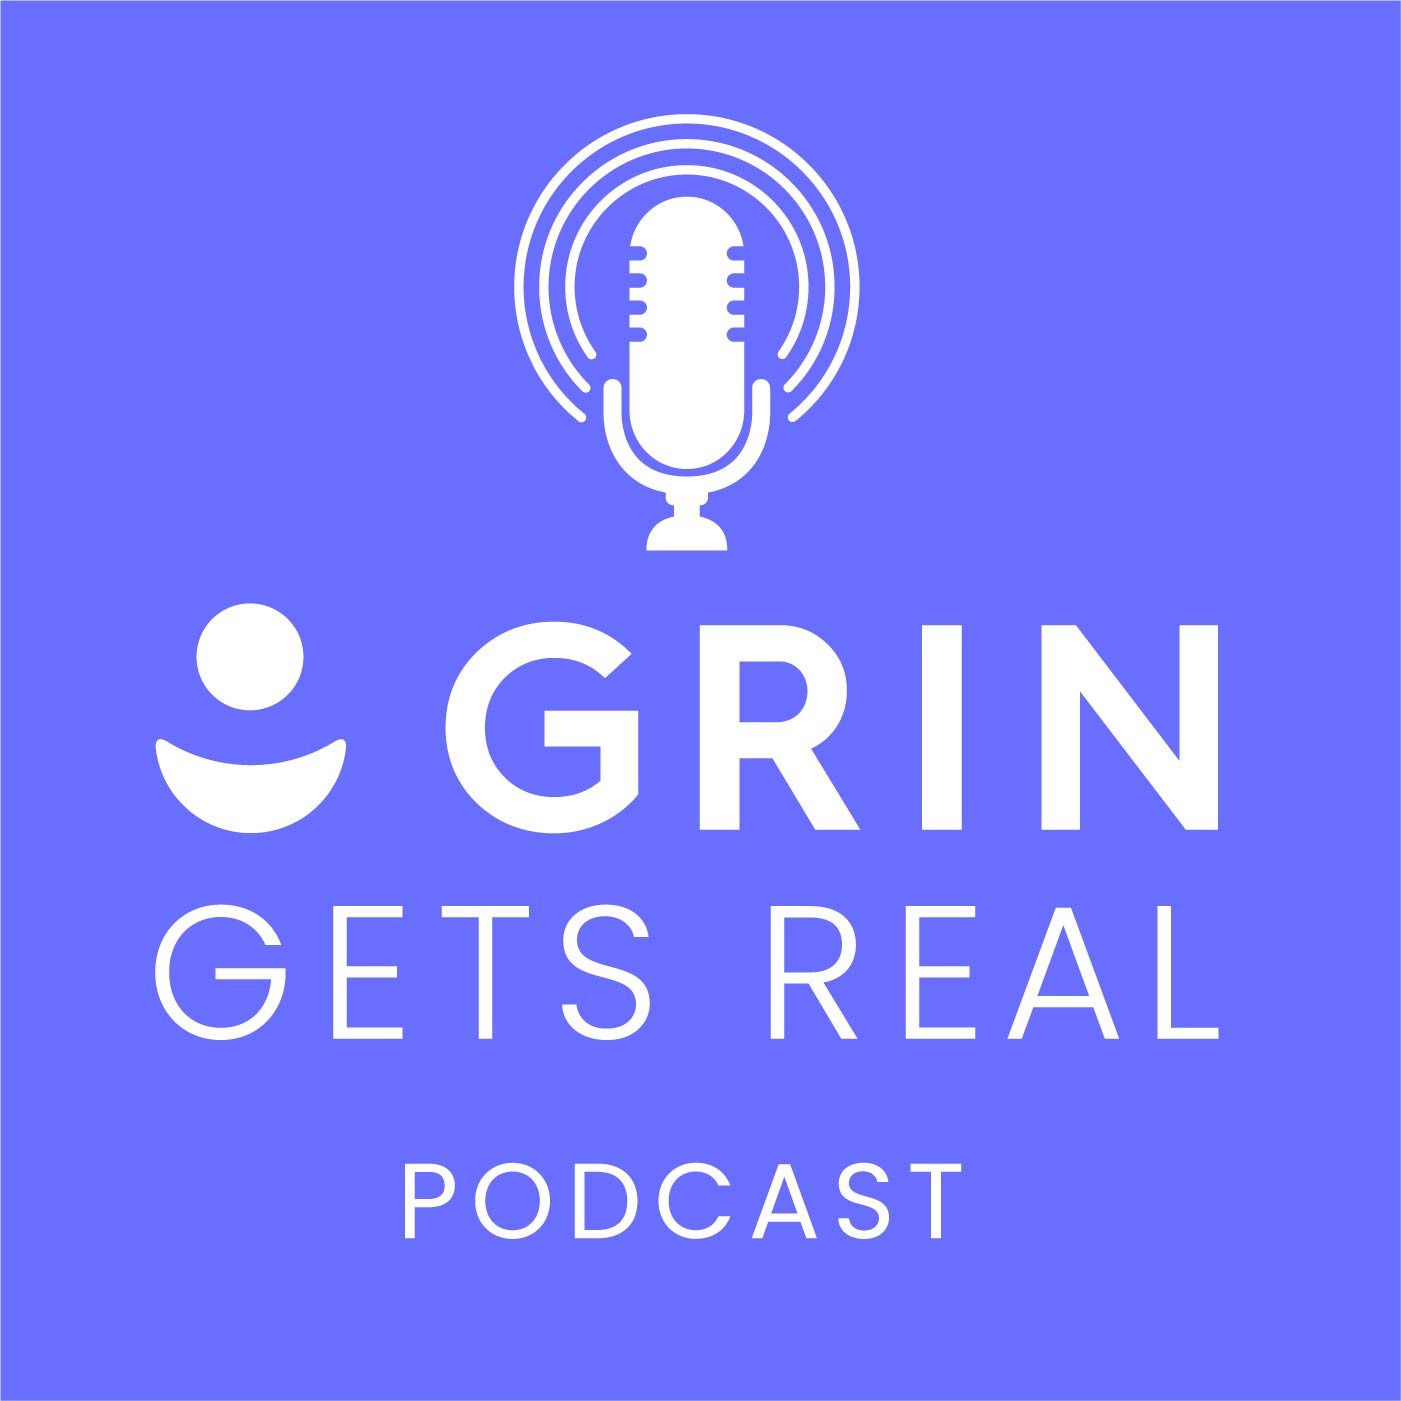 influencer marketing and ecommerce marketing podcast GRIN gets real